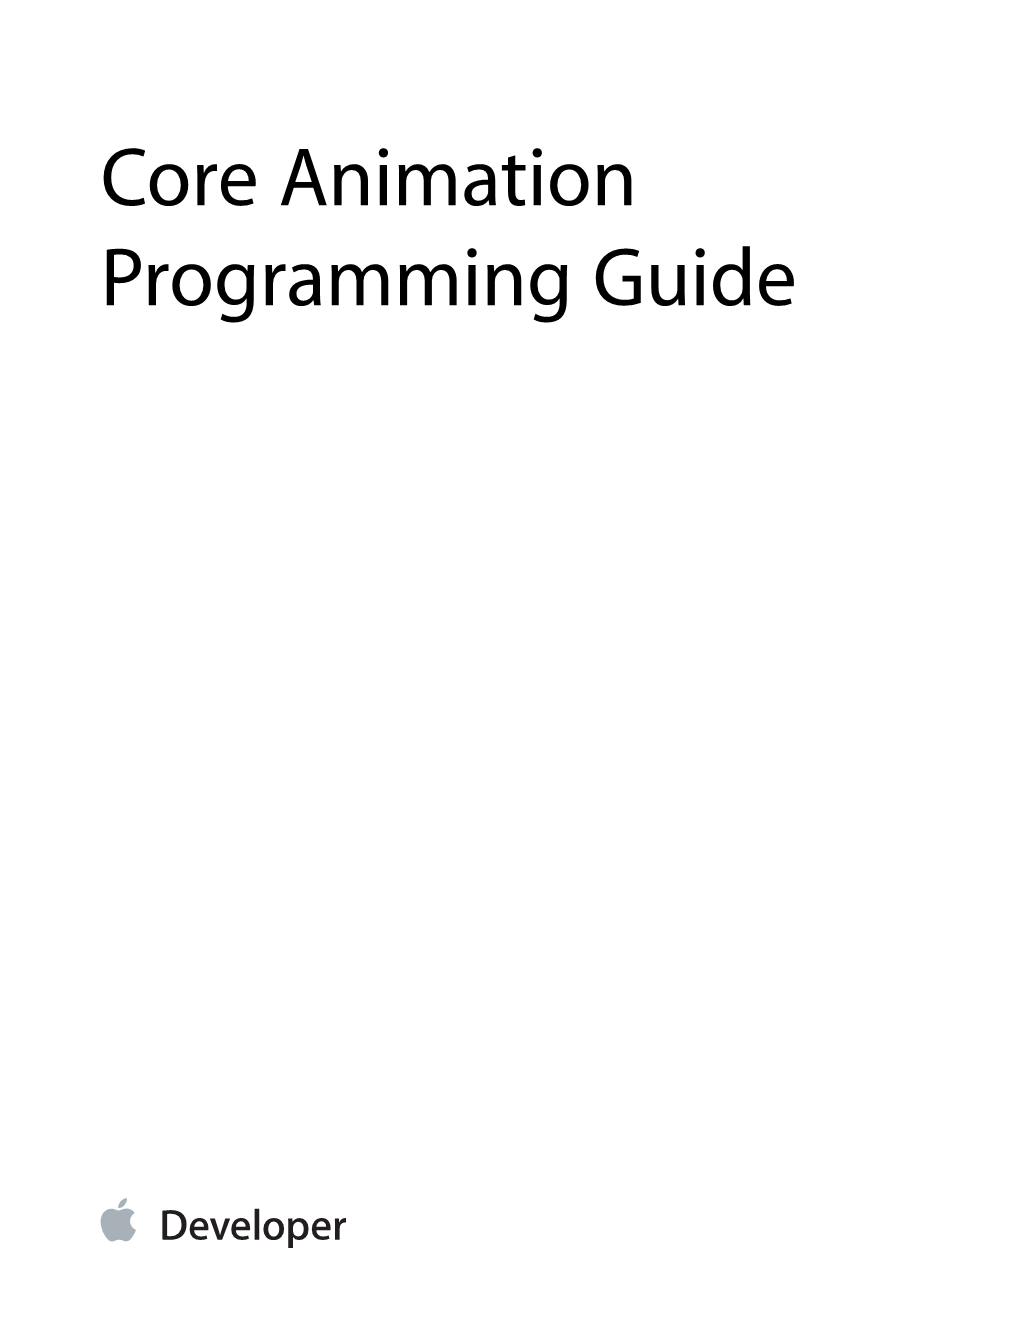 Core Animation Programming Guide Contents